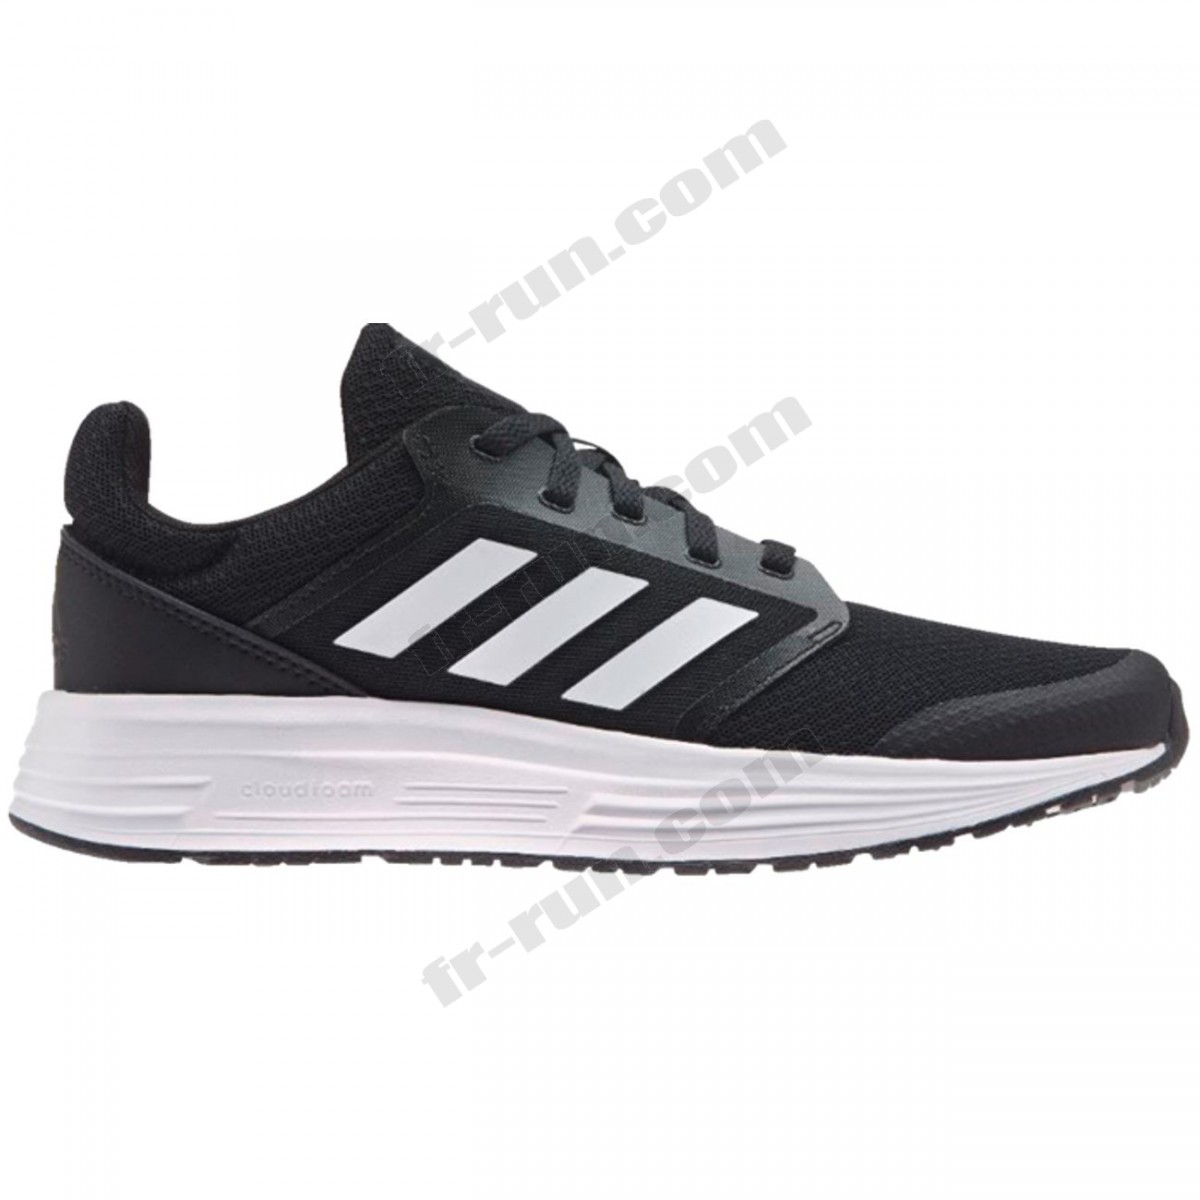 Adidas/CHAUSSURES BASSES running homme ADIDAS GALAXY 5 M √ Nouveau style √ Soldes - -0